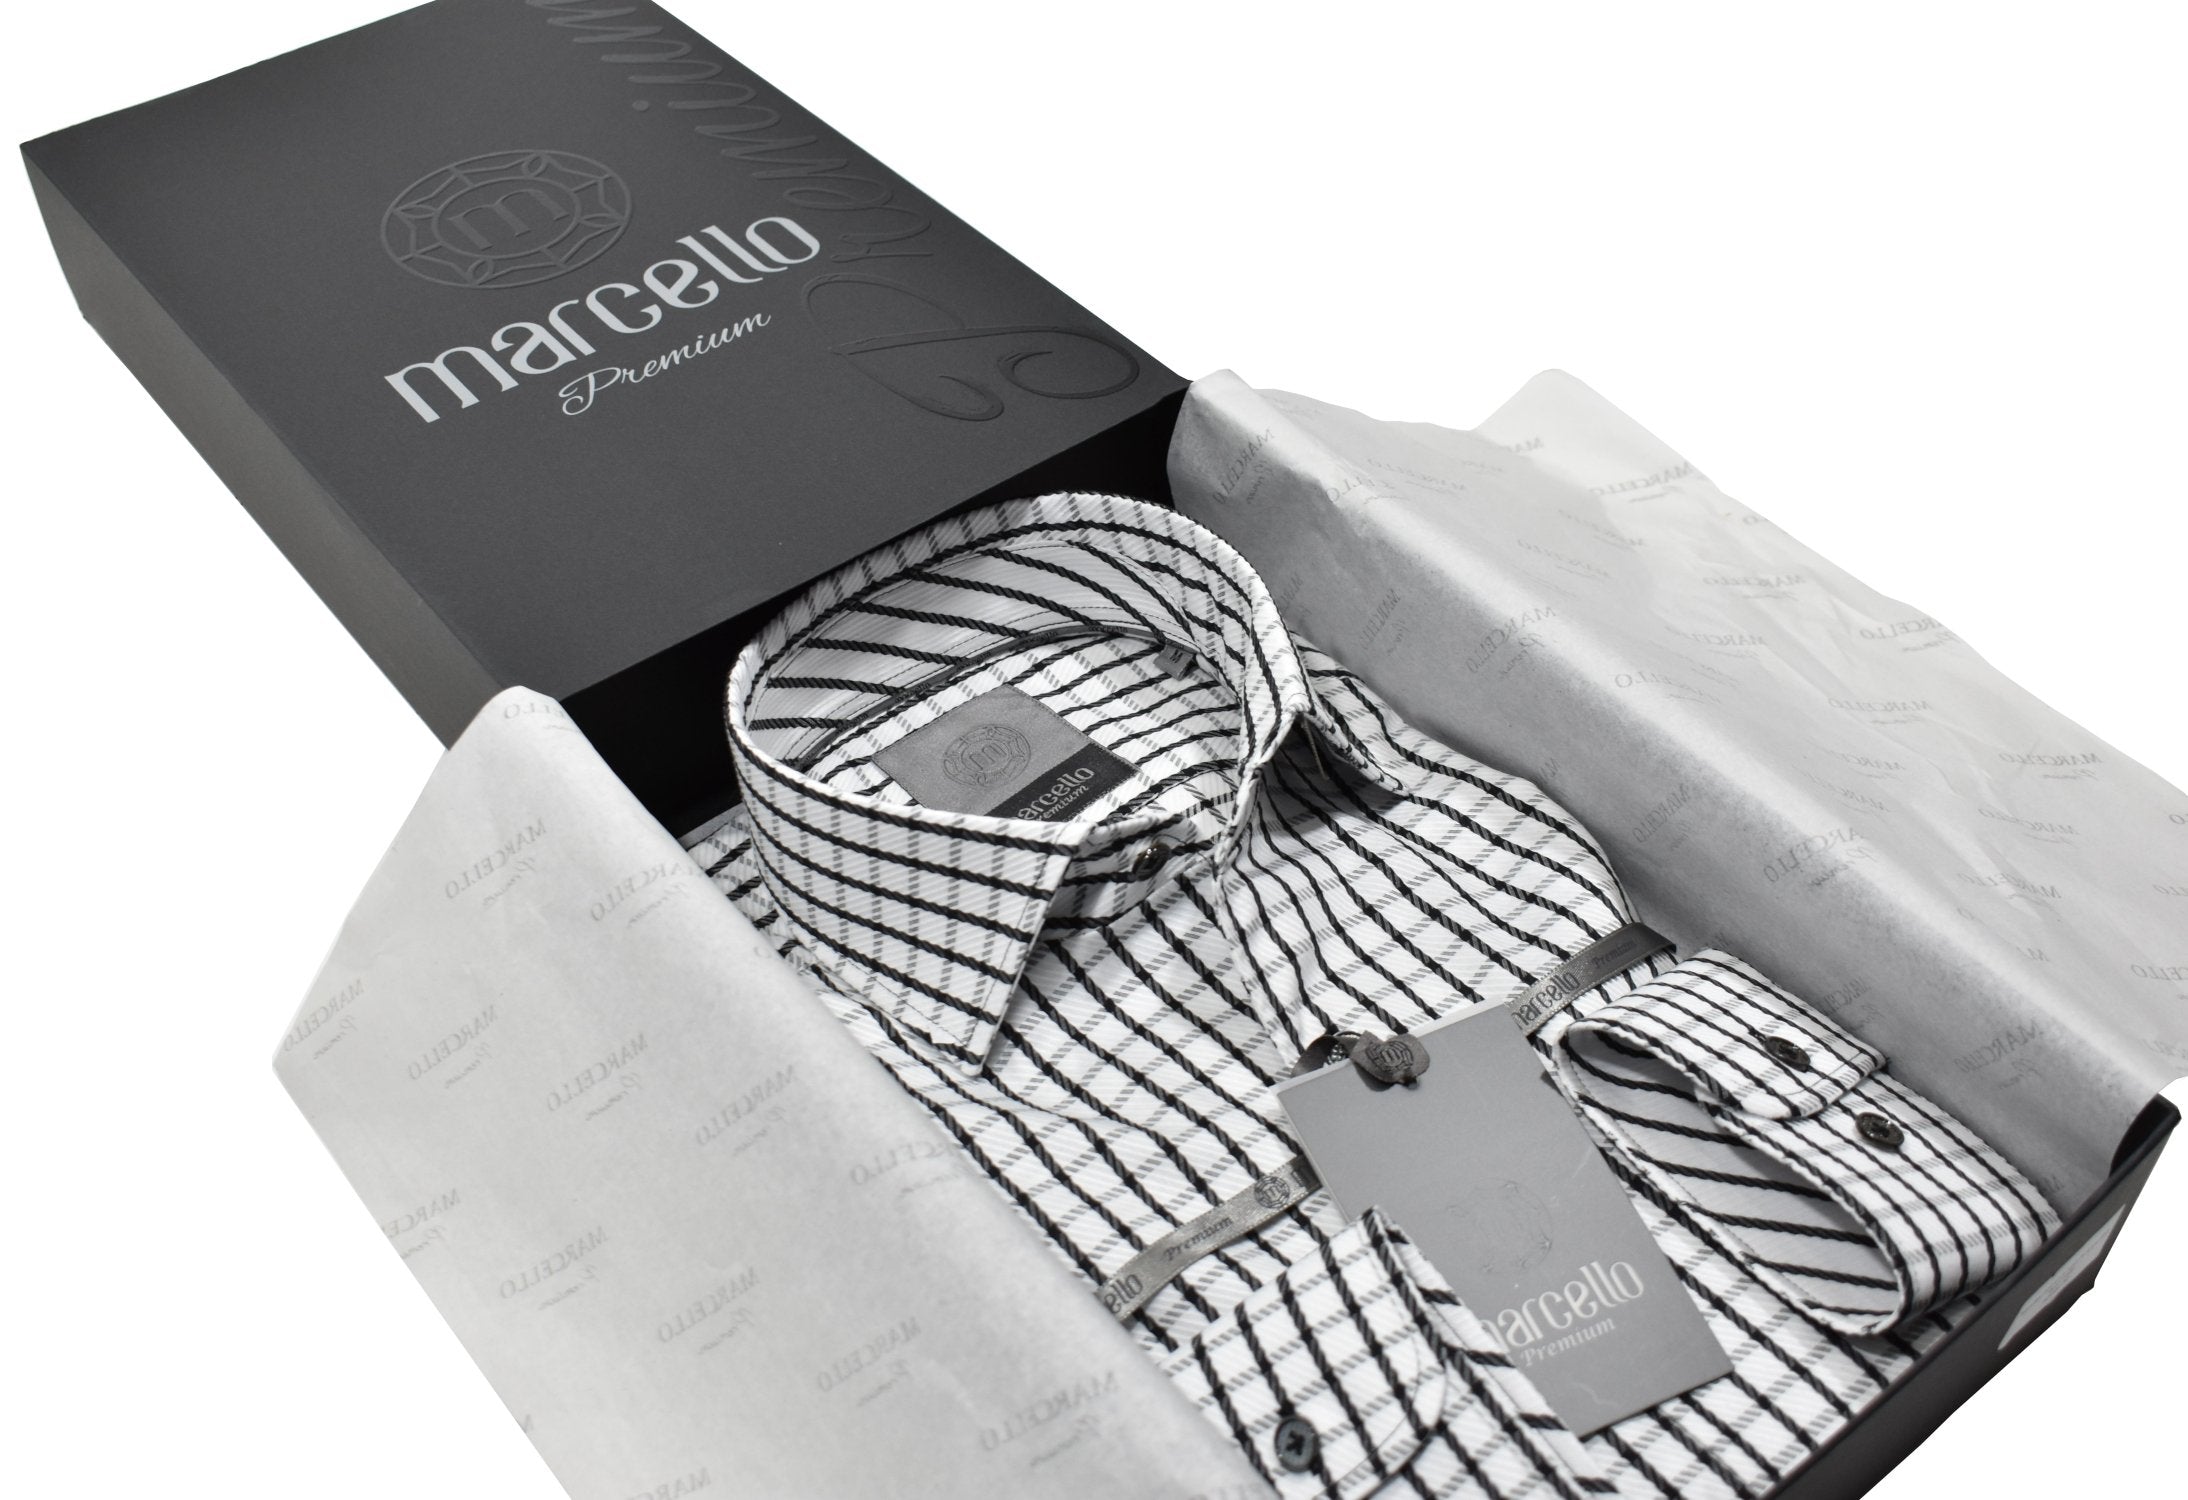 Elevate your wardrobe with the Marcello Premium Verezoni shirt. Crafted from extra fine fabrics sourced from fine Italian mills, our Marcello Premium program offers 100's 2 ply shirts in rich classic patterns. With the Marcello exclusive one piece roll collar, you'll feel confident and stylish in any setting.